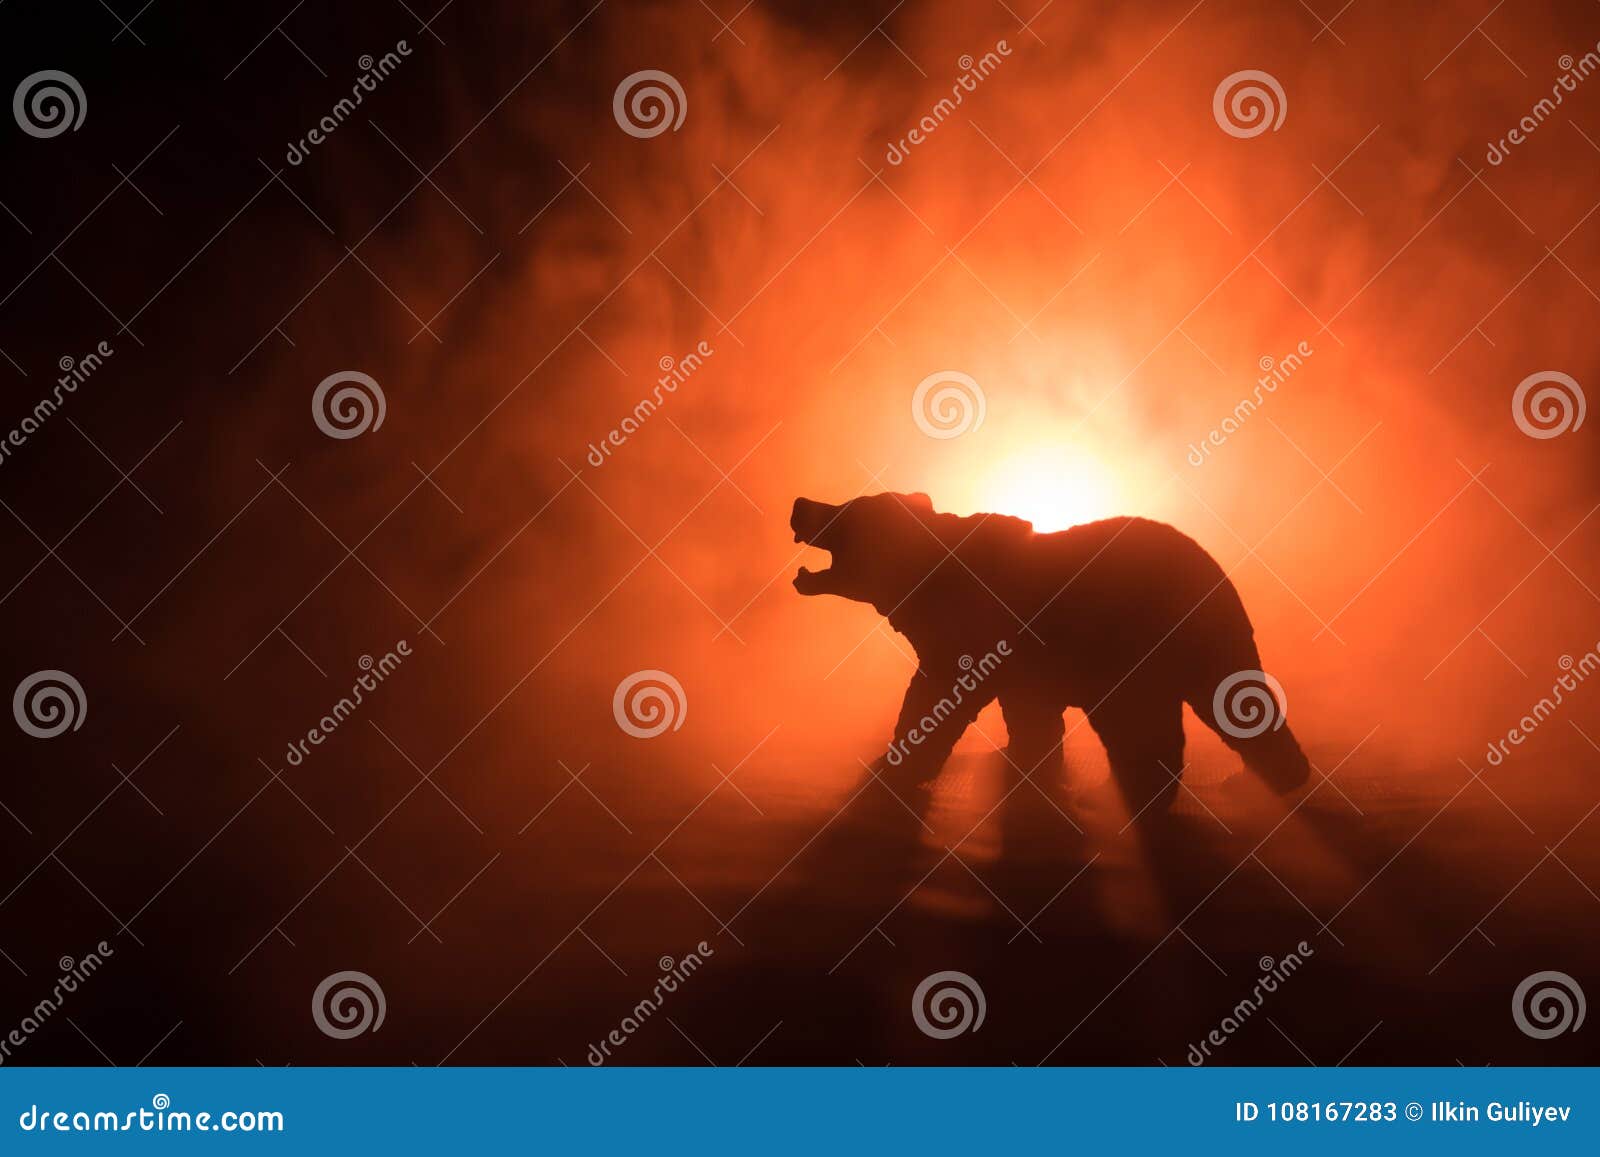 angry bear behind the fire cloudy sky. the silhouette of a bear in foggy forest dark background. selective focus